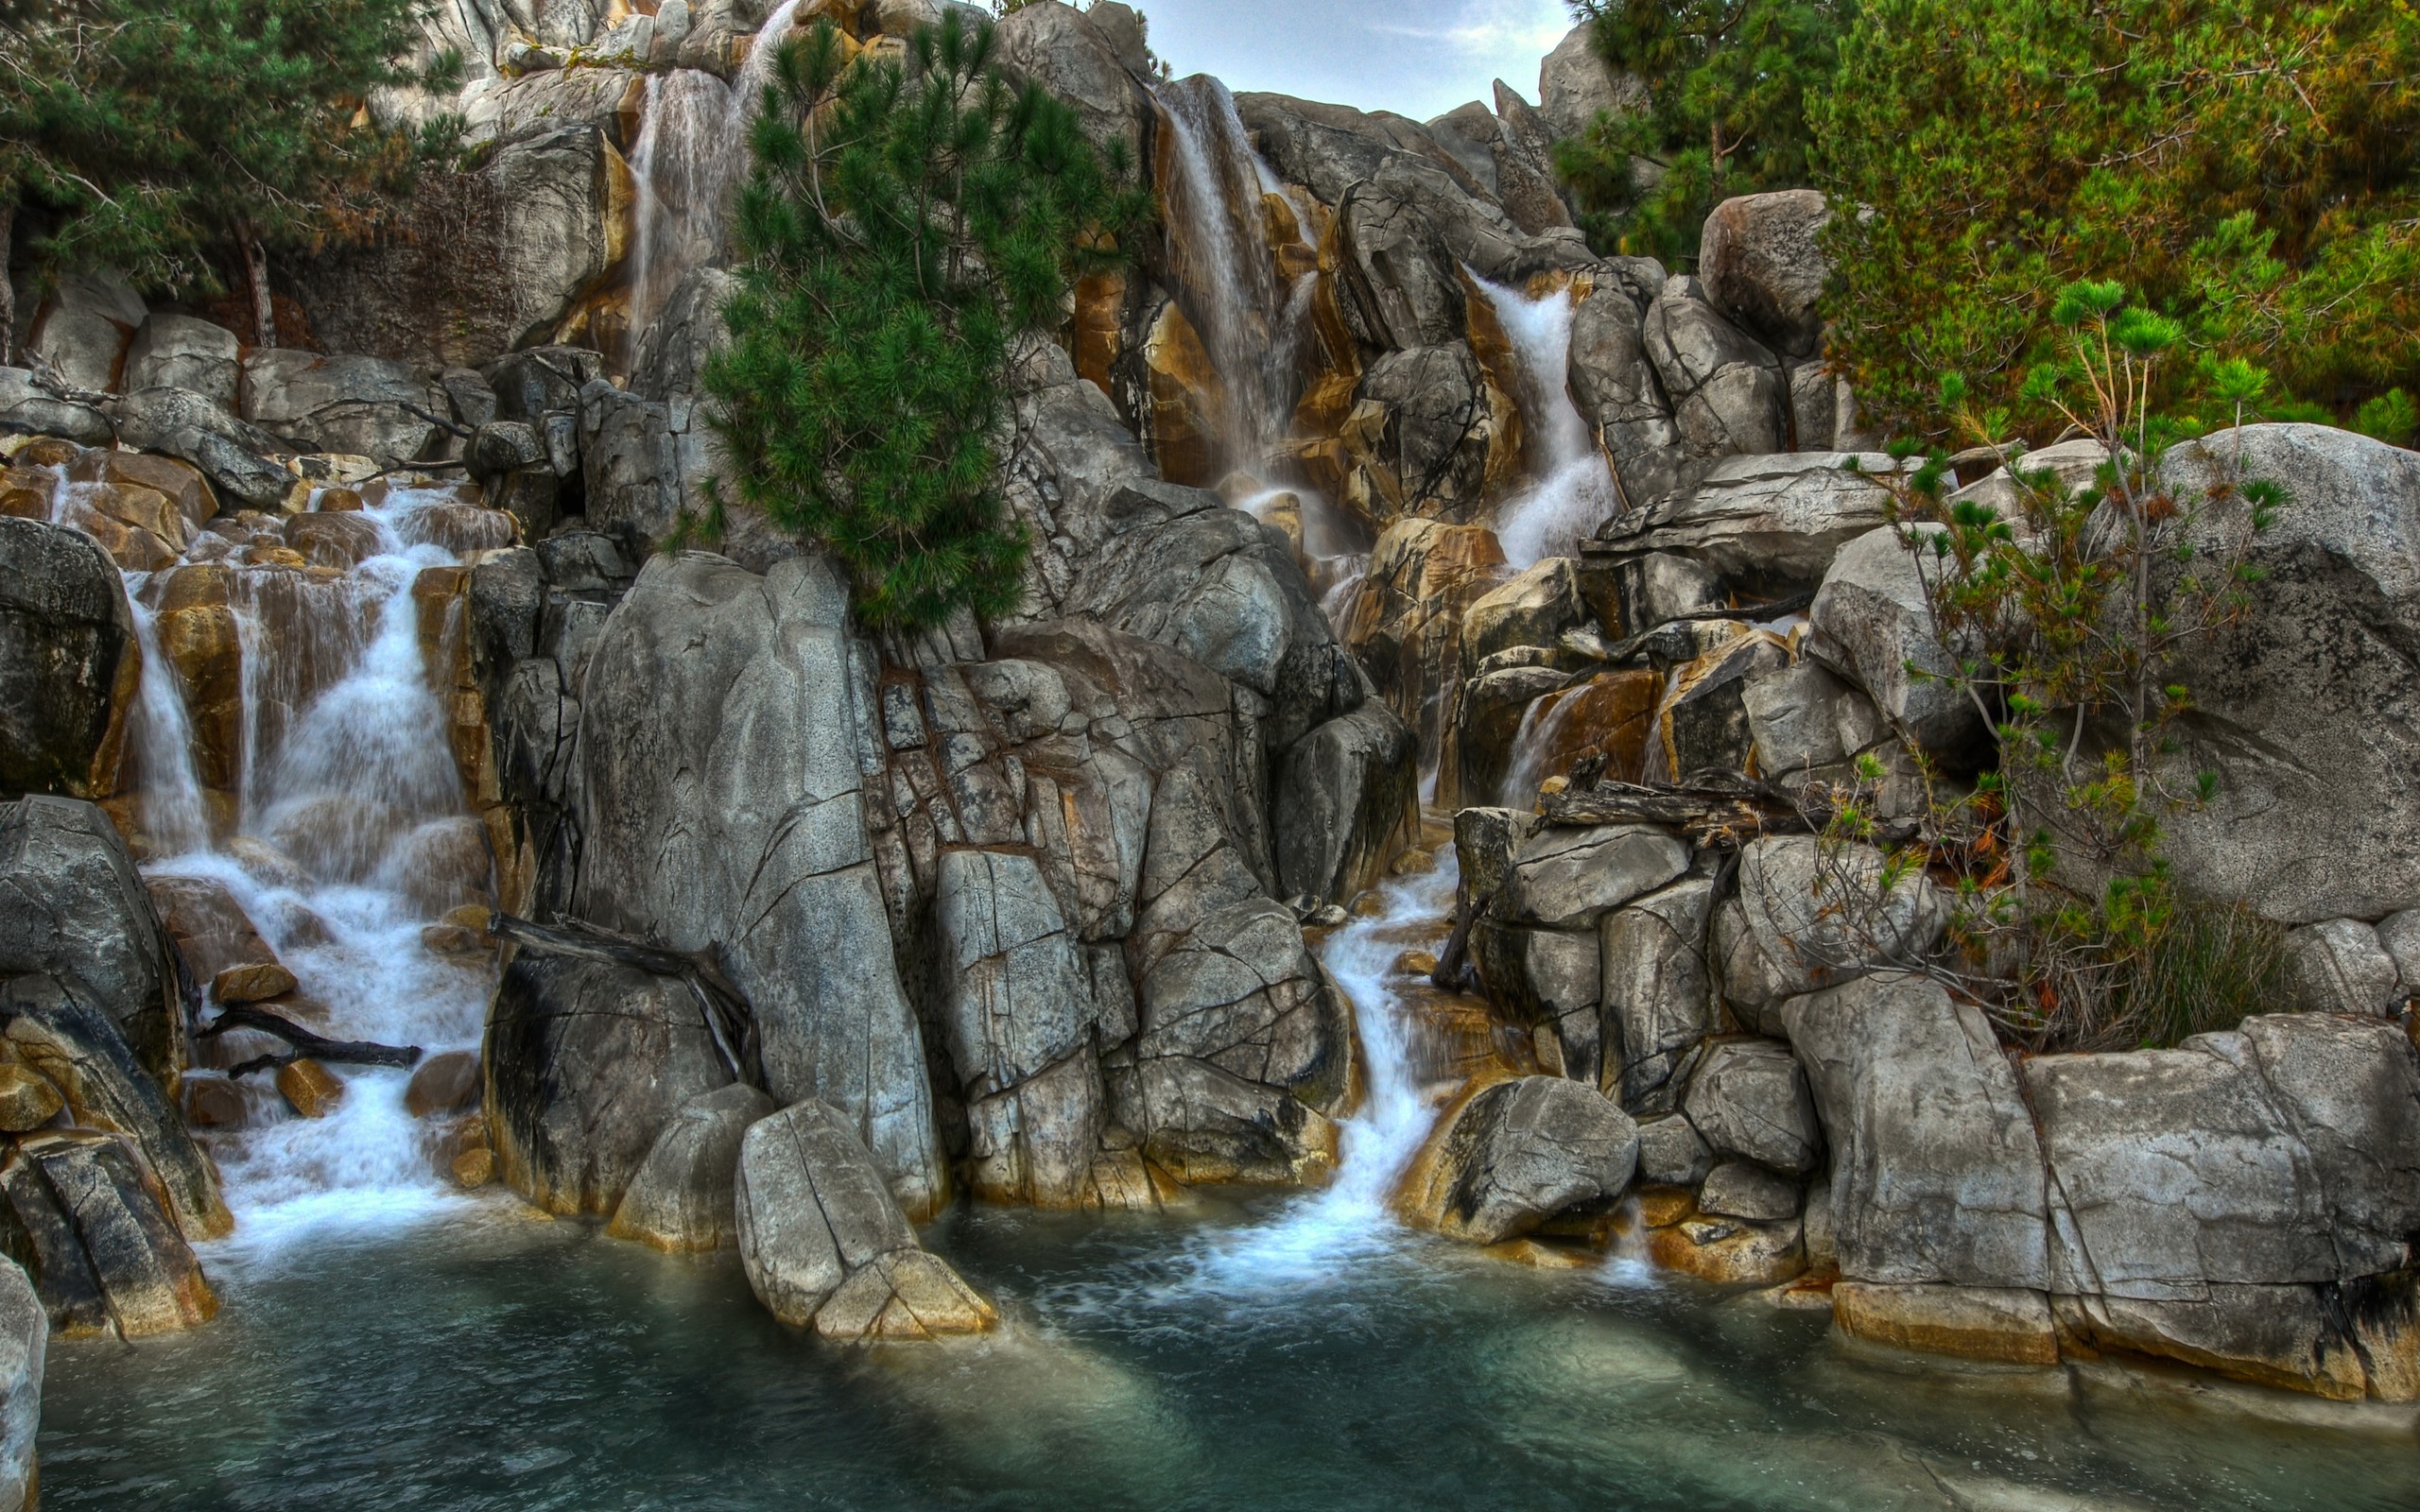 General 2560x1600 nature waterfall HDR rocks outdoors stones